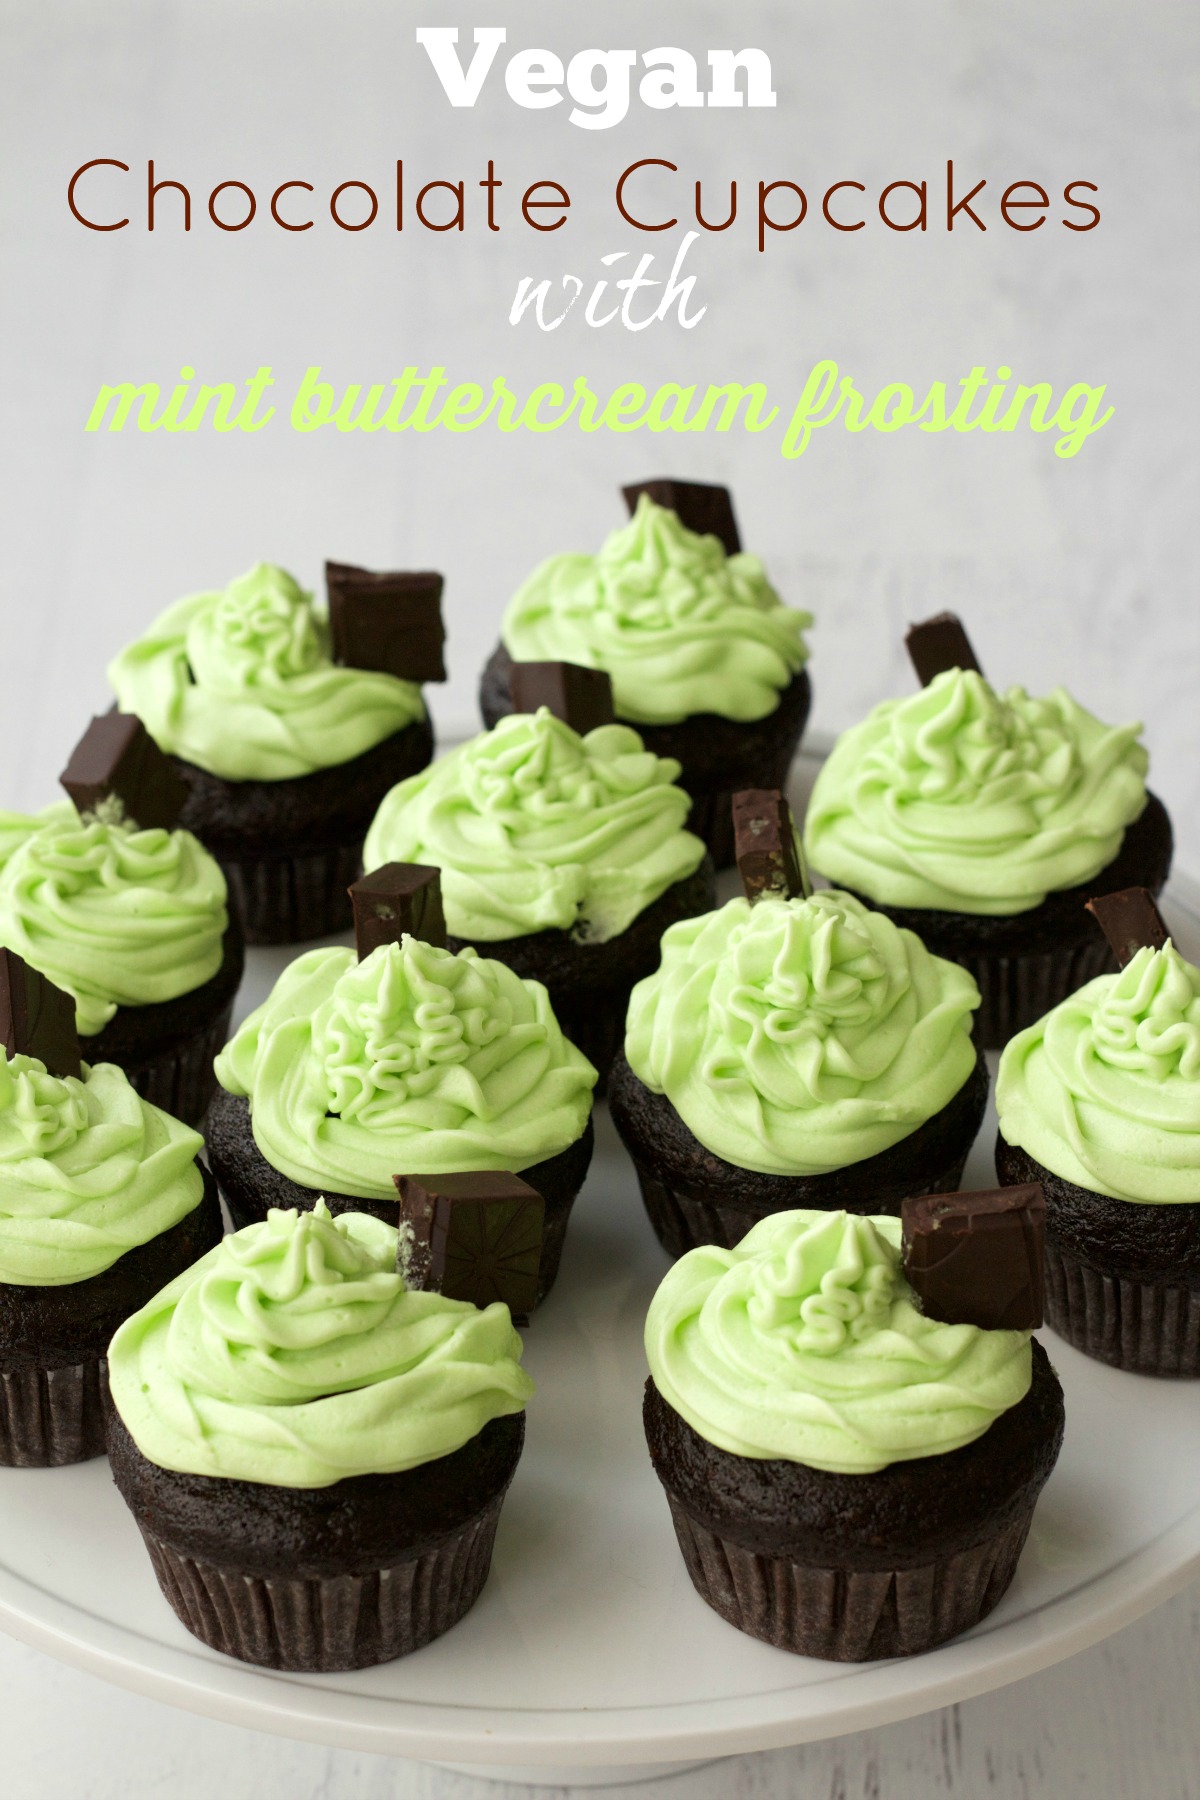 Vegan Chocolate Cupcakes with Frosting